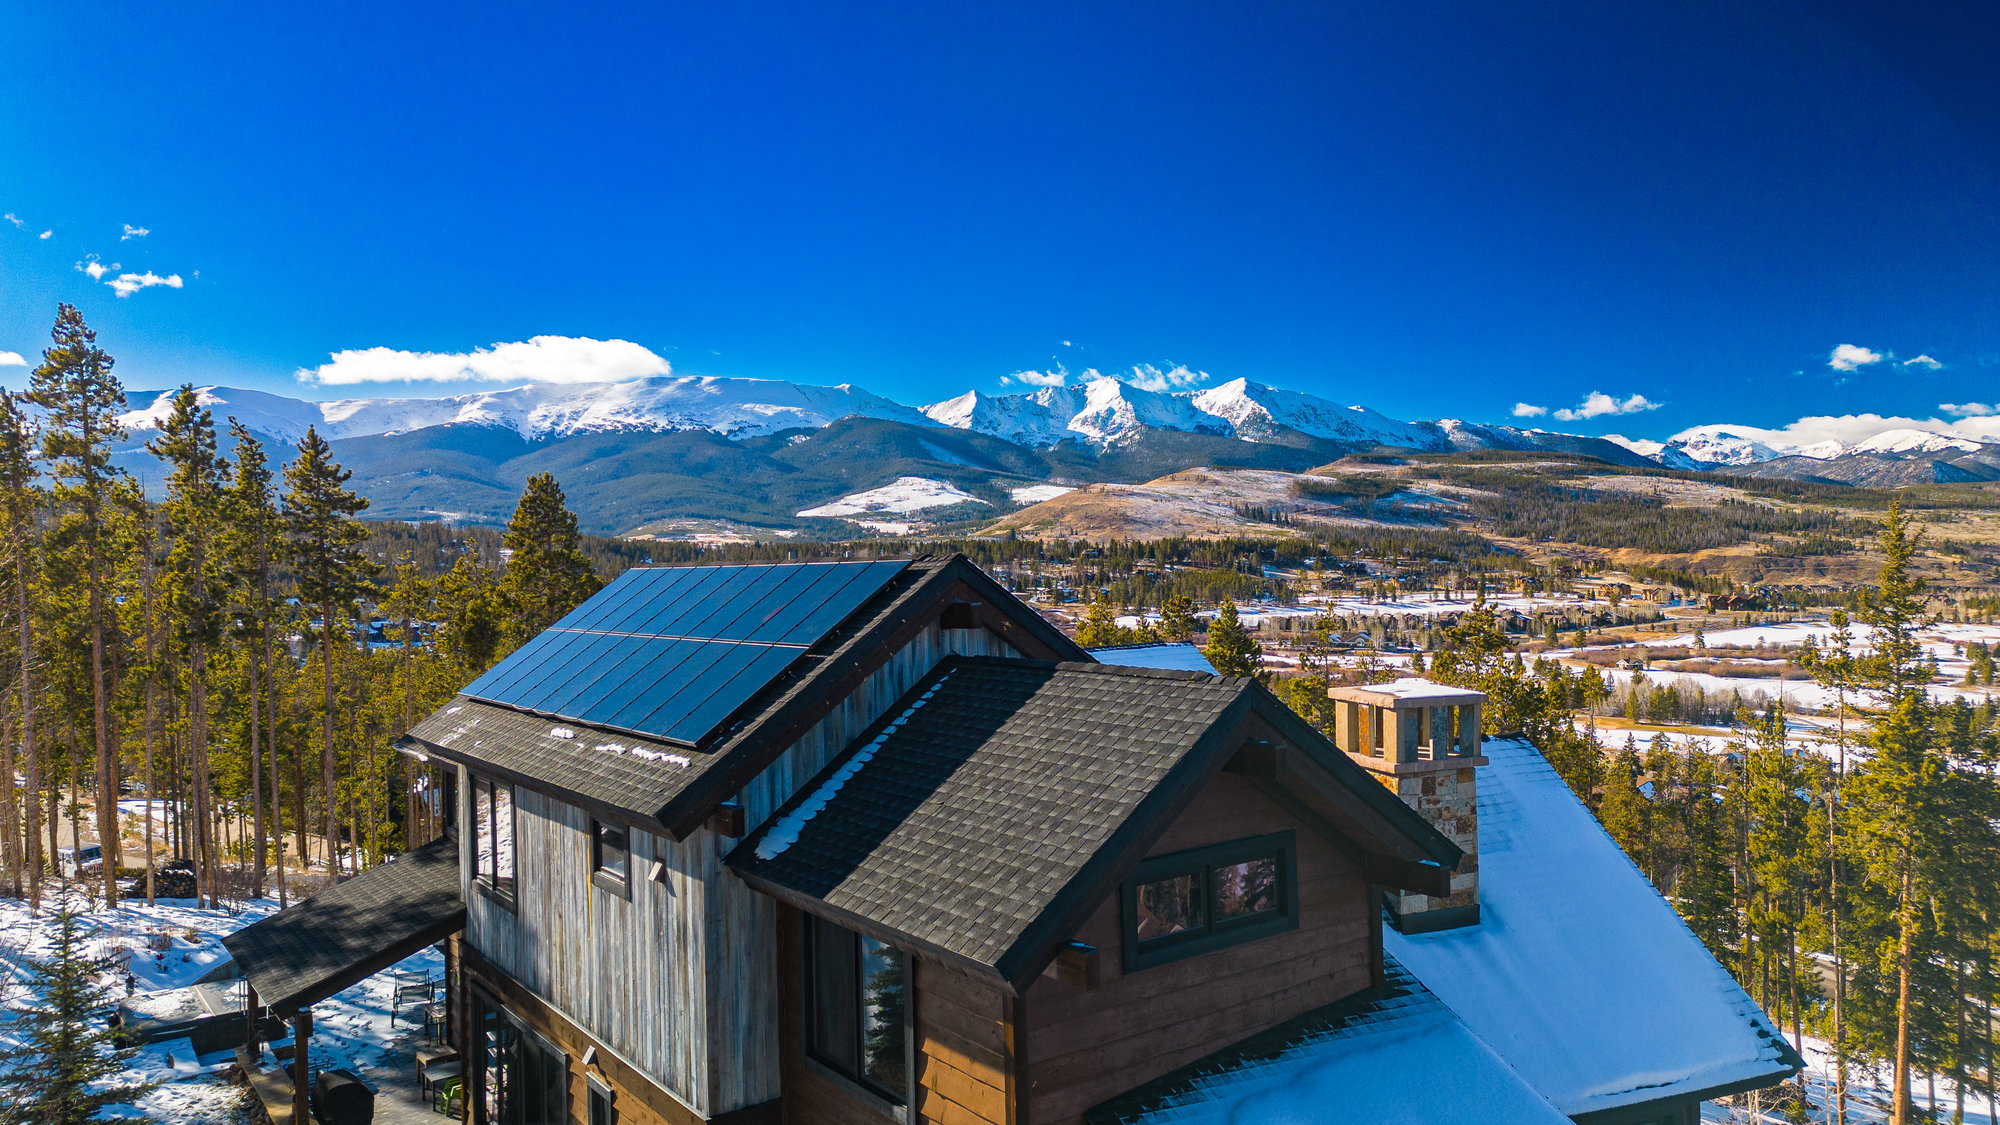 Picture of home with solar panels on the roof and mountains in the background.